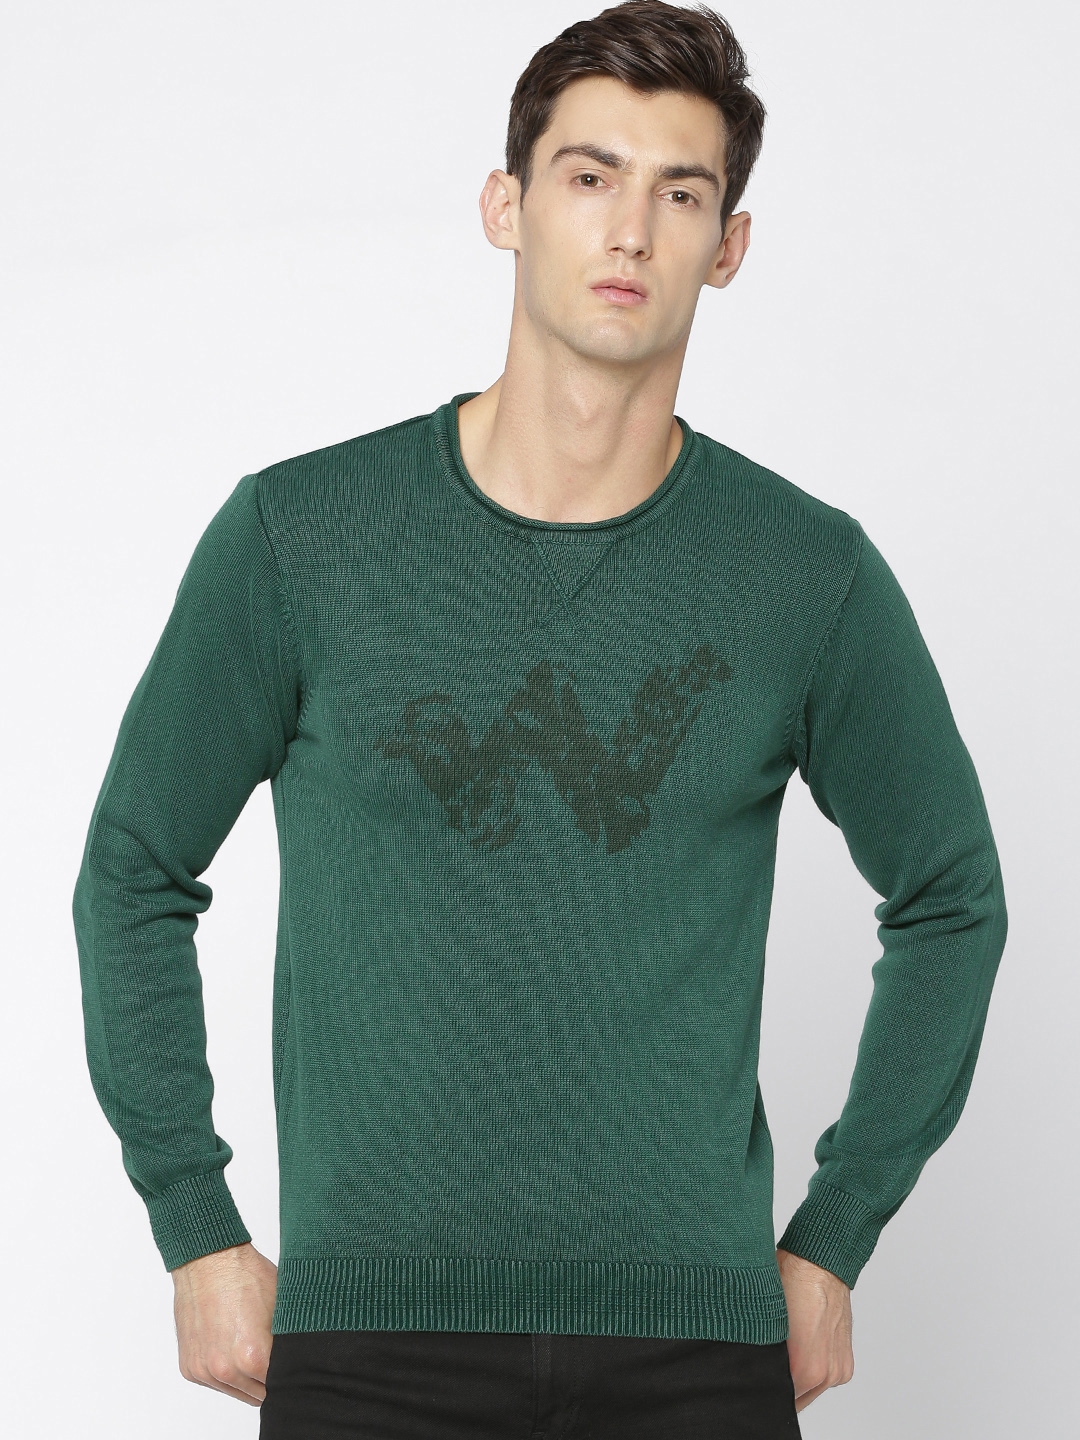 printed sweaters for men